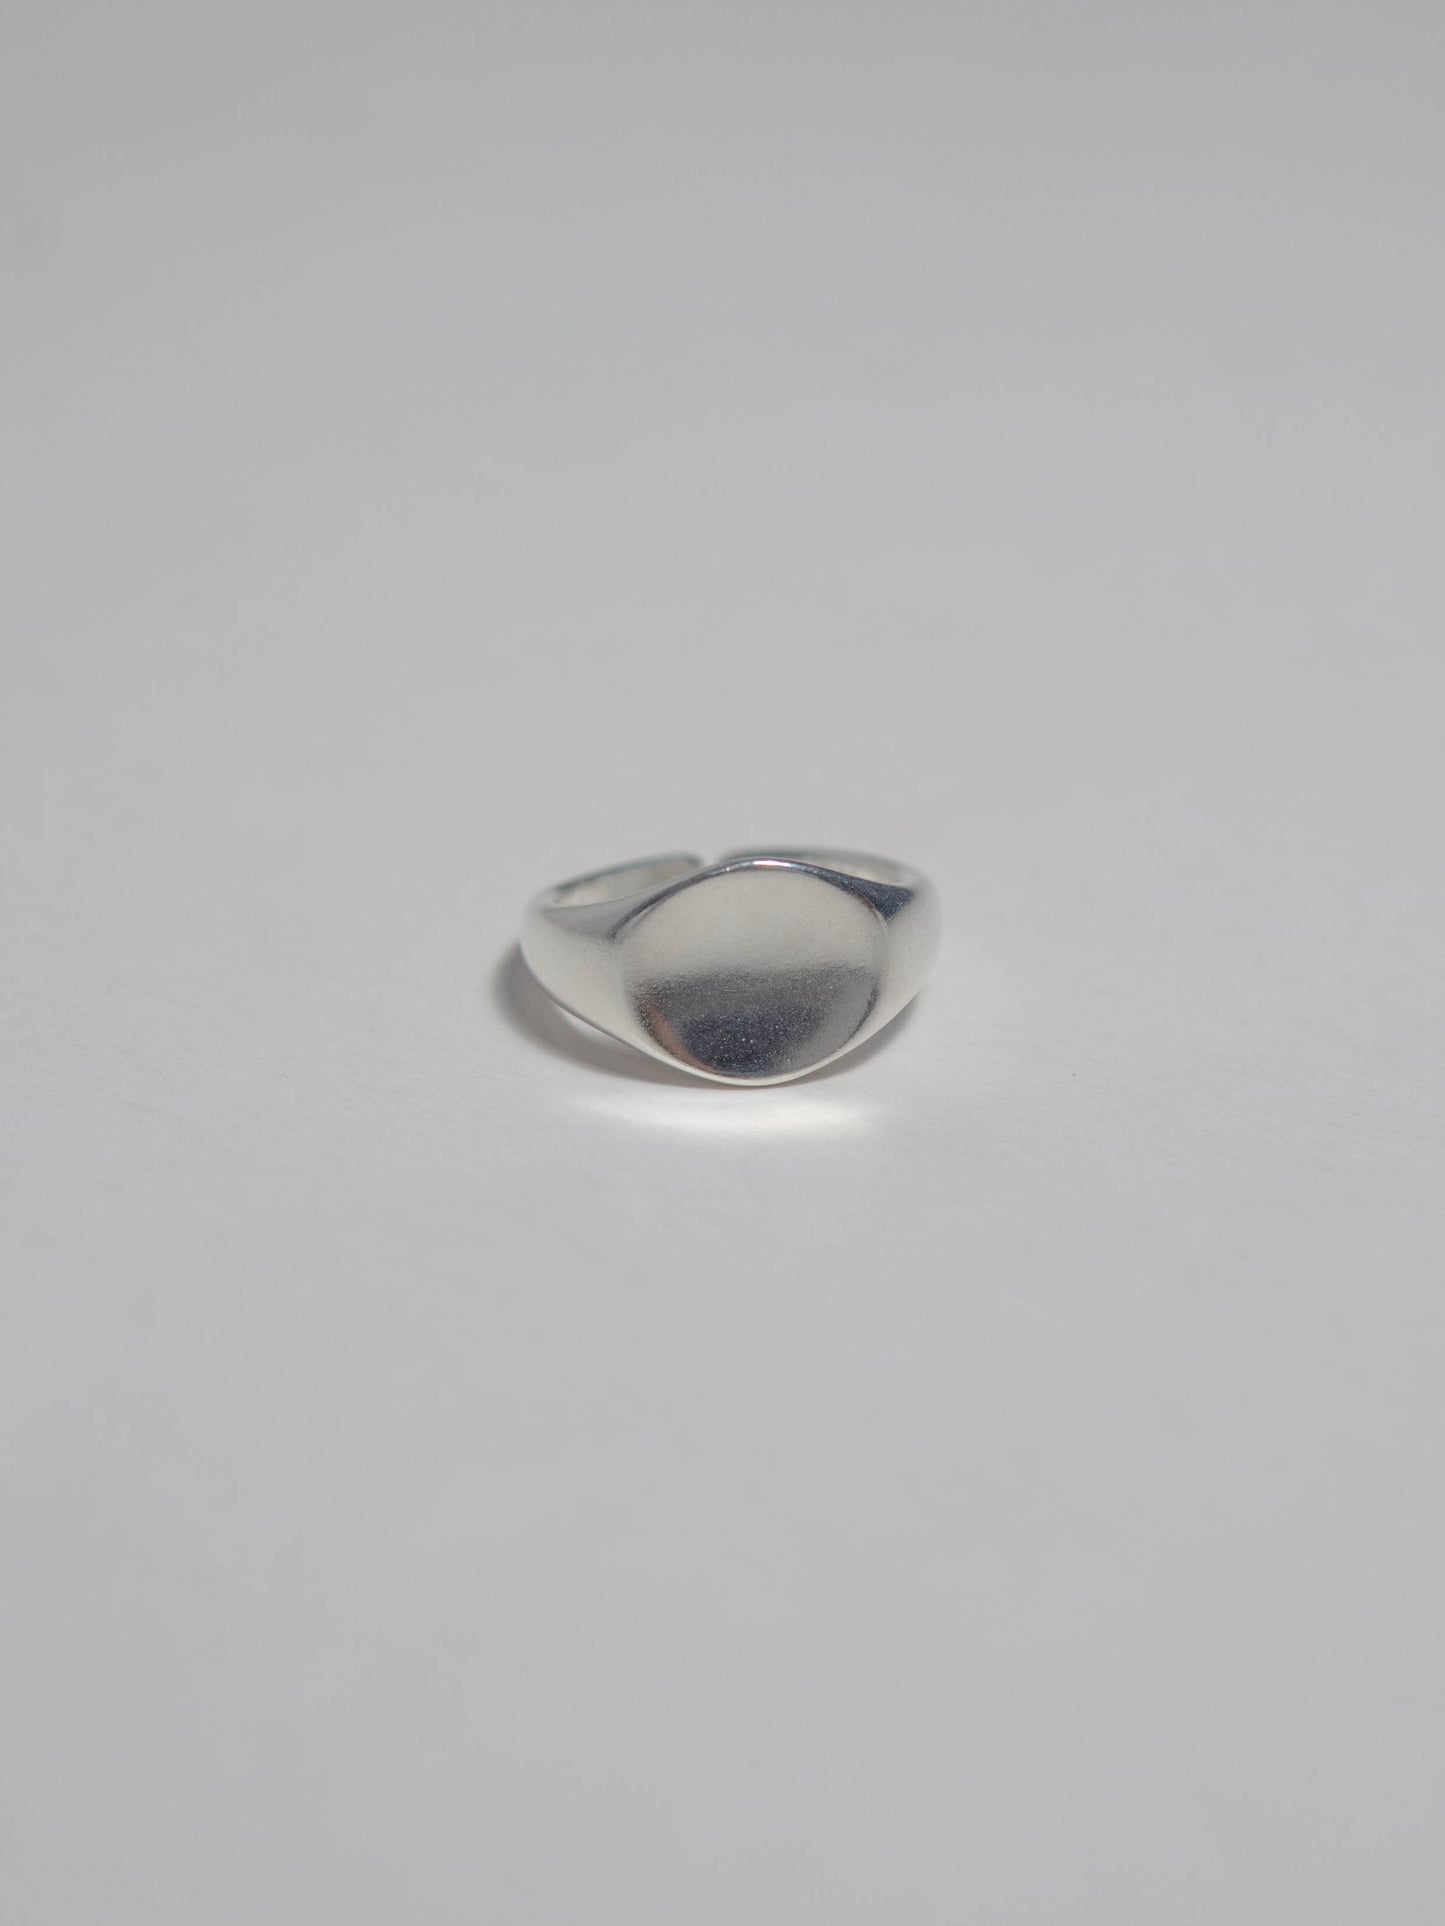 Geometric circle ring in Sterling Silver